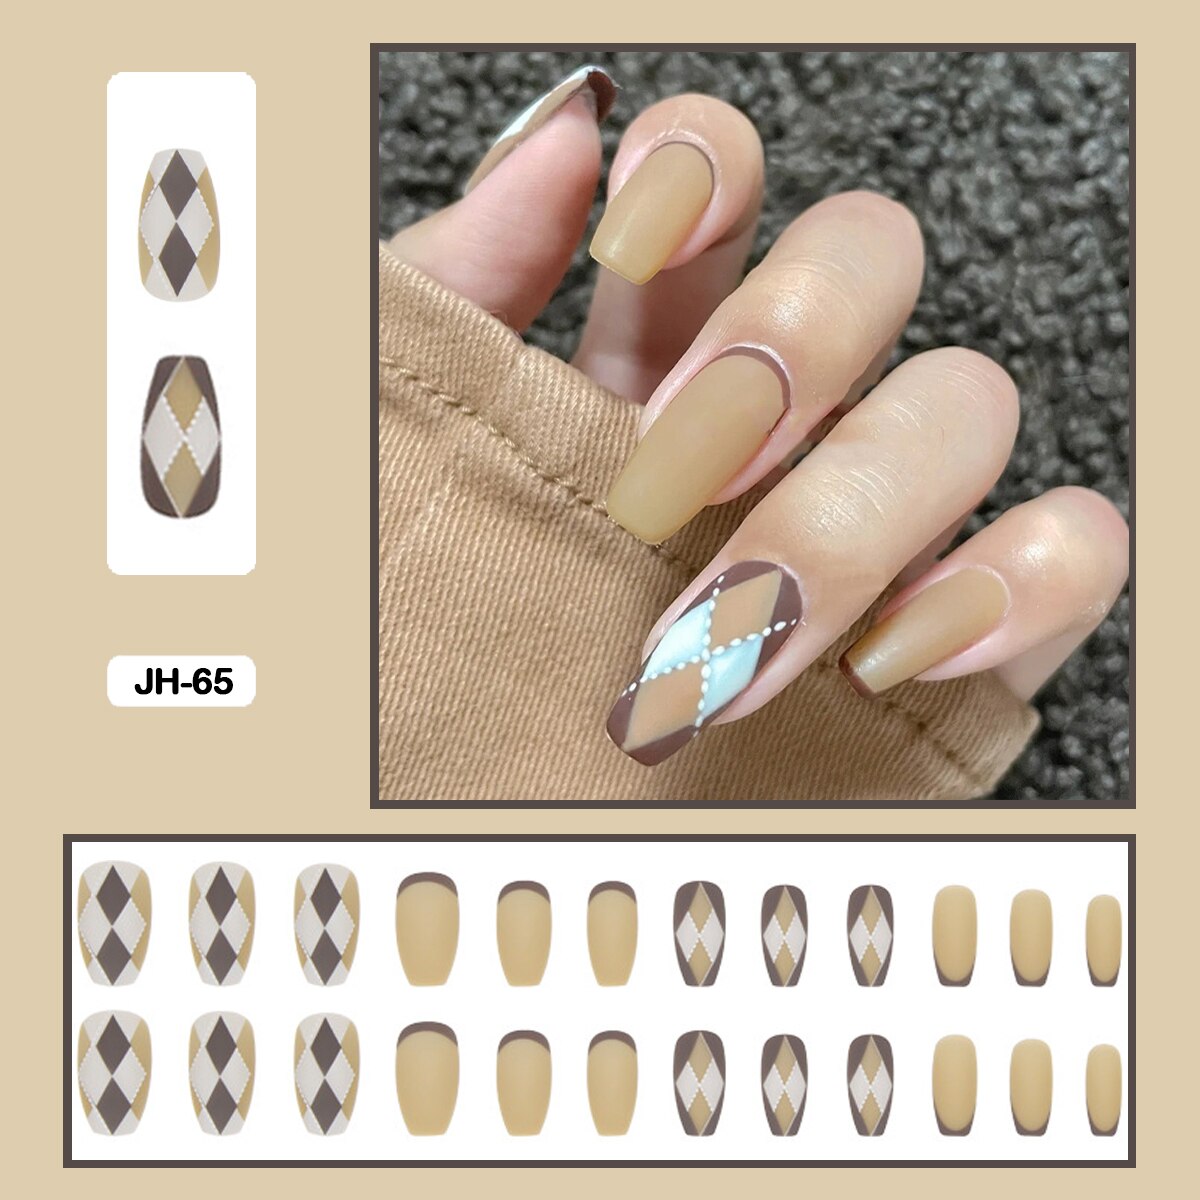 Graduation gifts 24pcs/box  Lovely Checked-pattern Press On Nails Full Cover Fake Nails With Glue Long Wearable False Nails WIth Wearing Tools